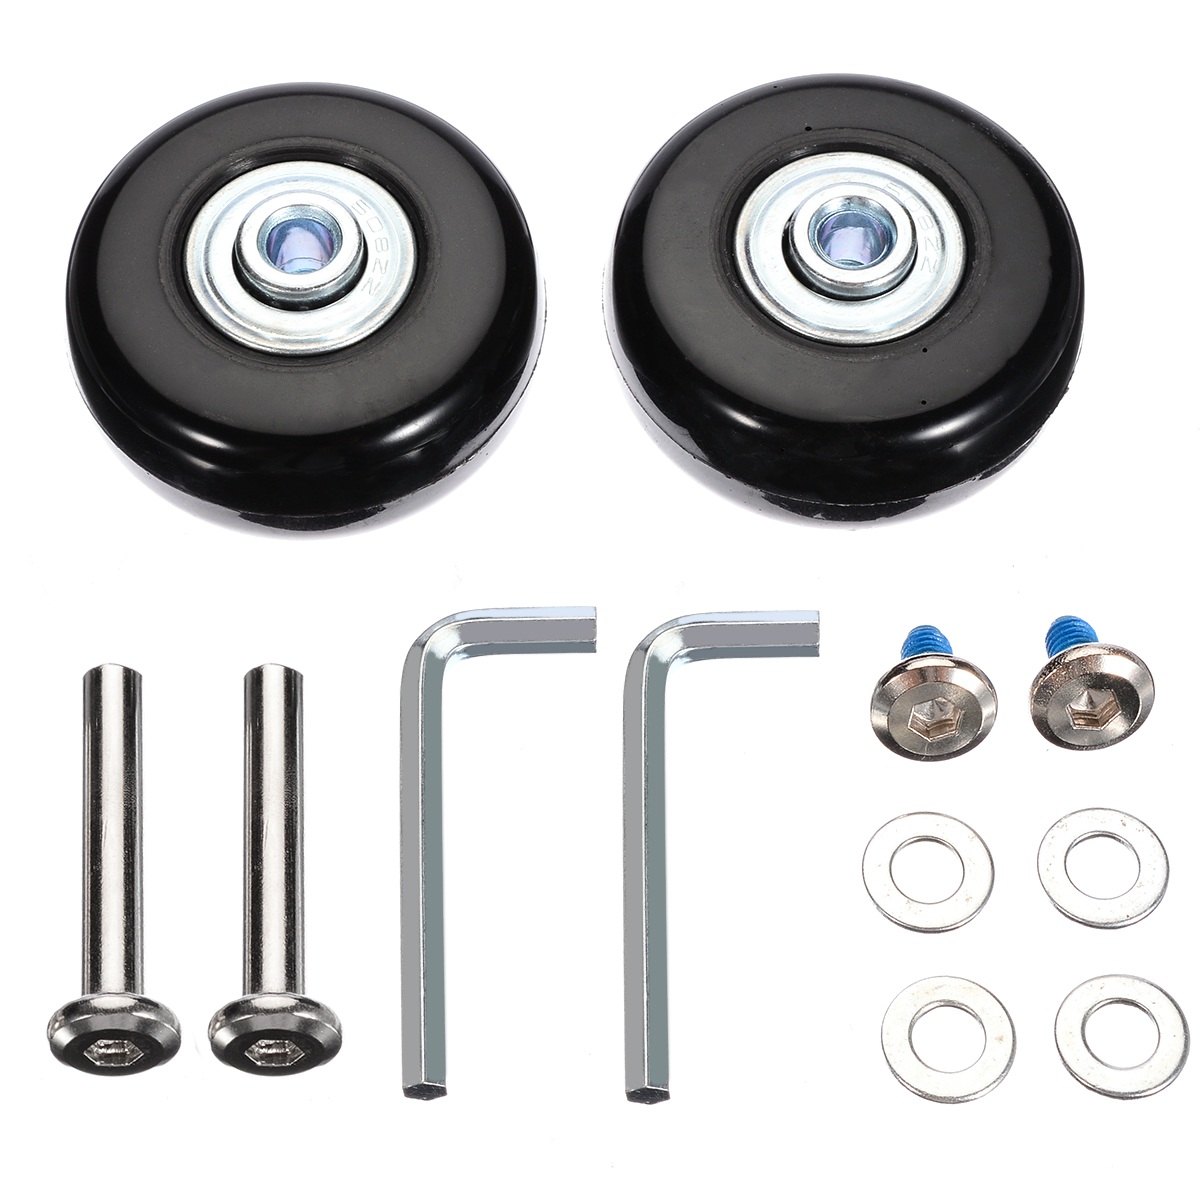 Mayitr 2 Sets Luggage Suitcase Replacement Kit OD 45mm Wheels Roller Hardware Furniture Casters